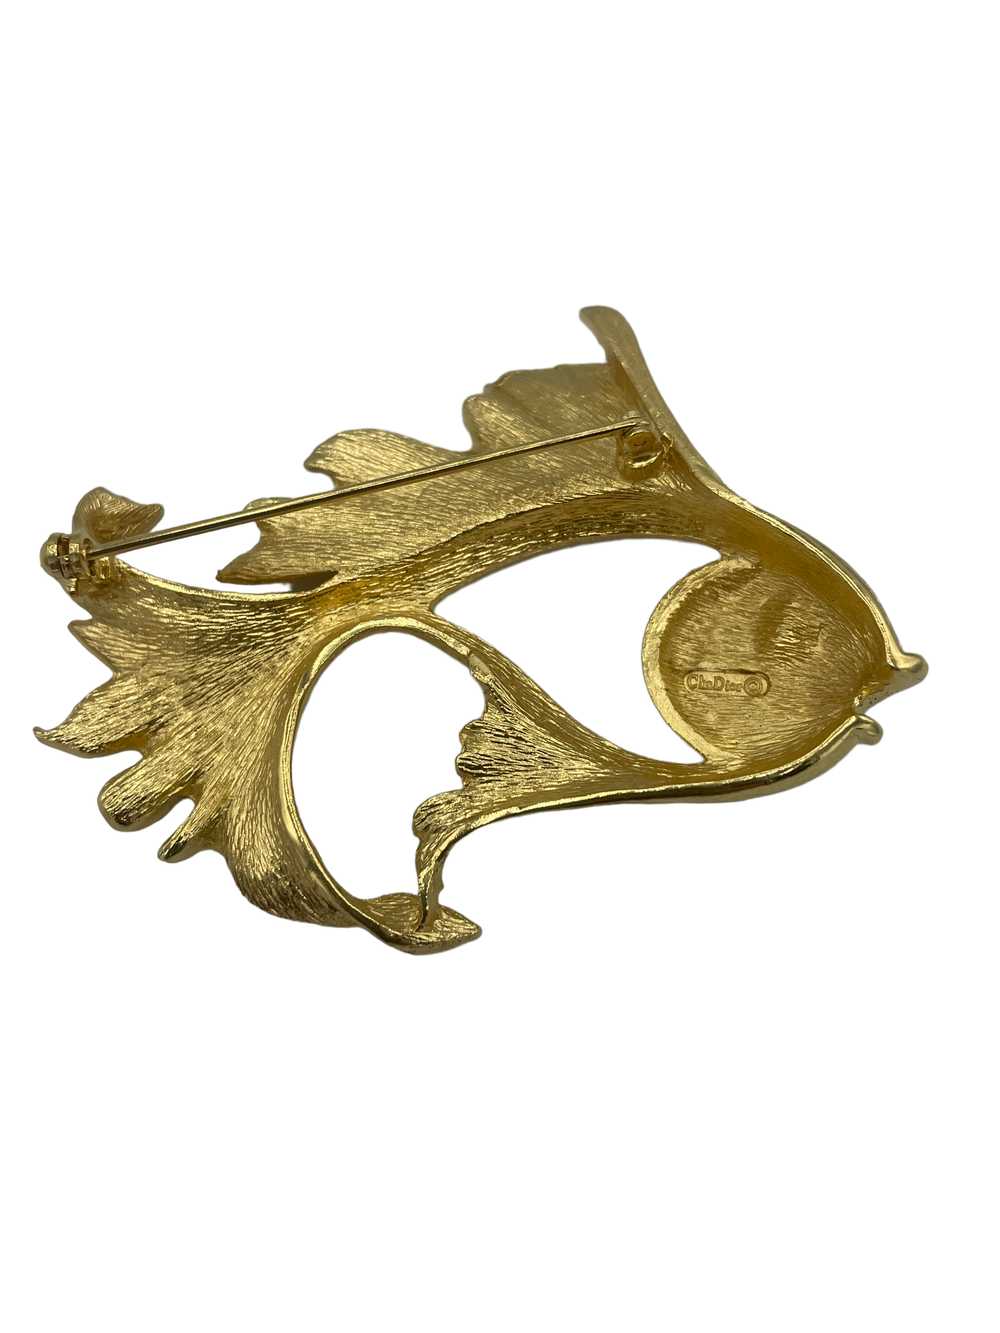 Christian Dior 80s Whimsical Goldfish Brooch - image 2